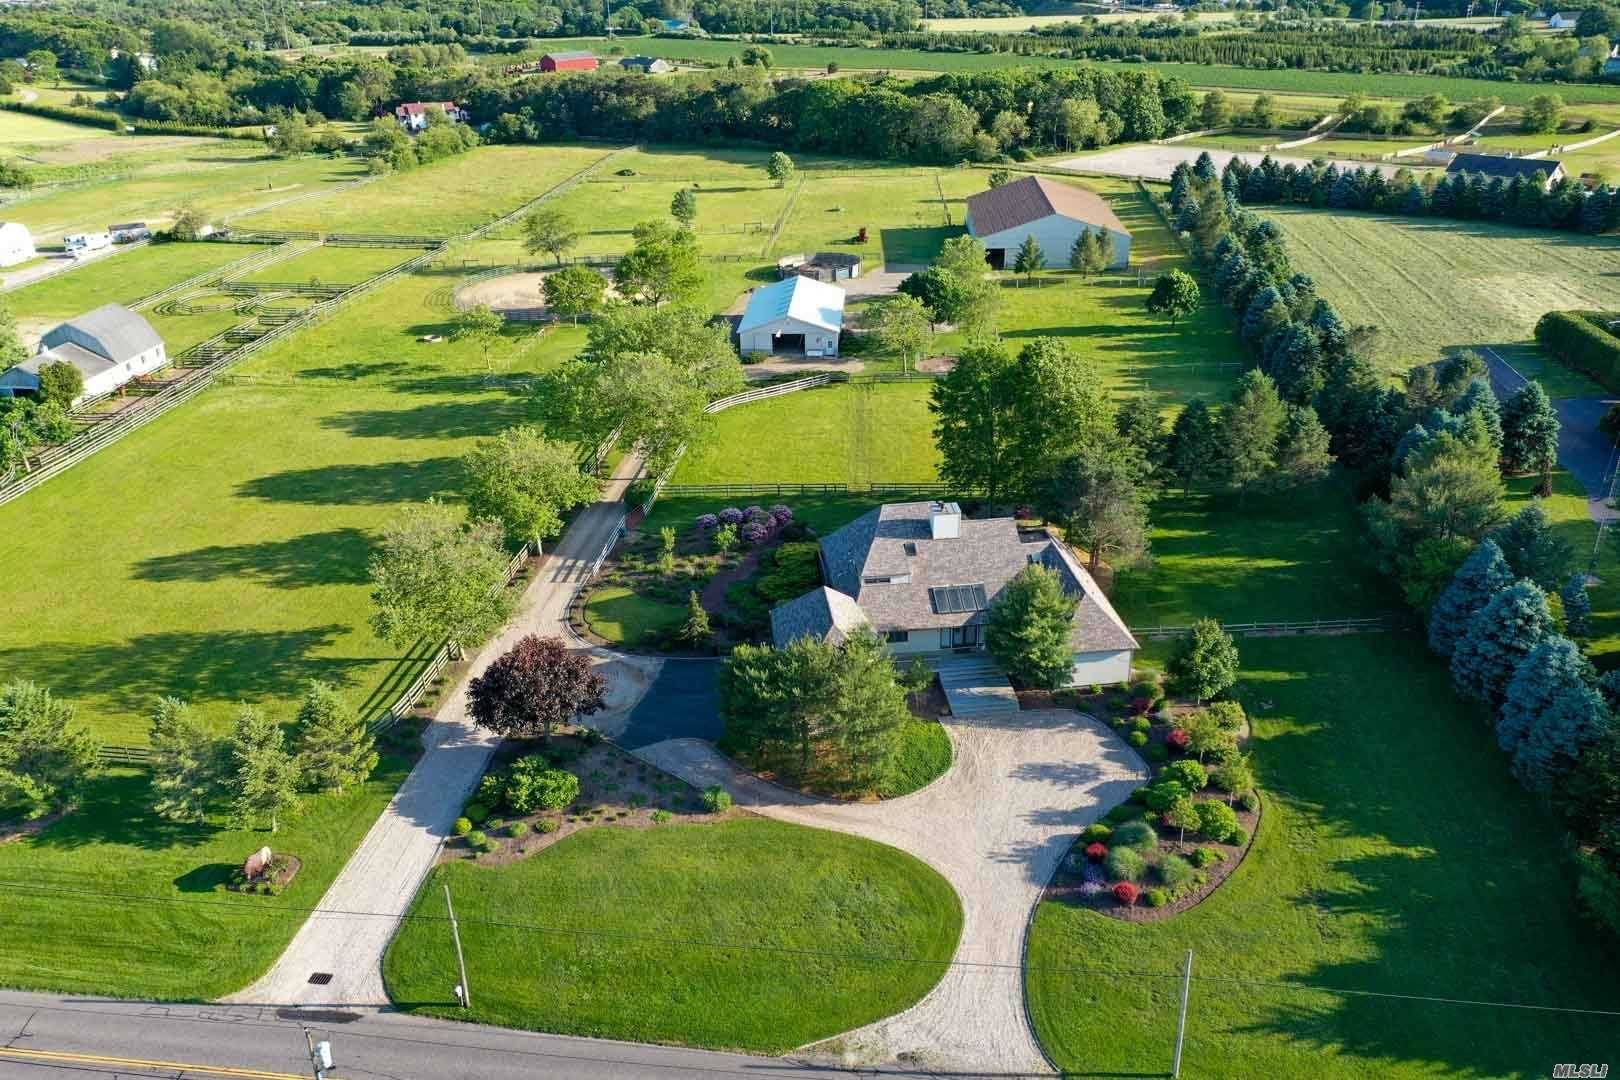 Wonderful opportunity to use this spectacular property custom built Residence as an Equestrian Center specializing in full service boarding, training and showing !